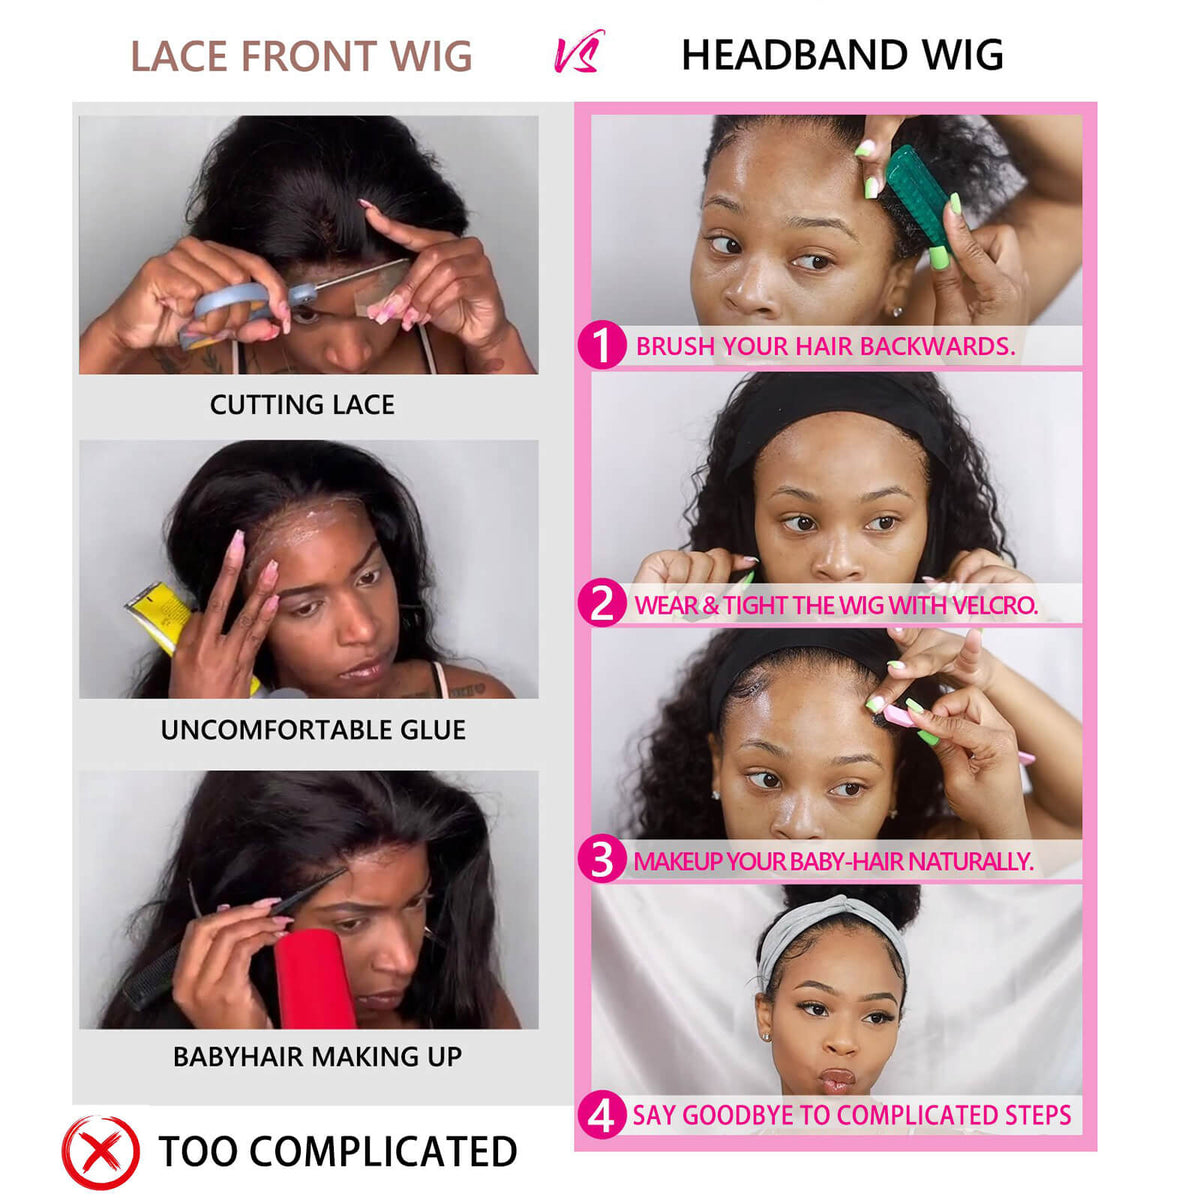 Headband Wig VS Regular Lace Front Wigs No Complicated Steps Needed